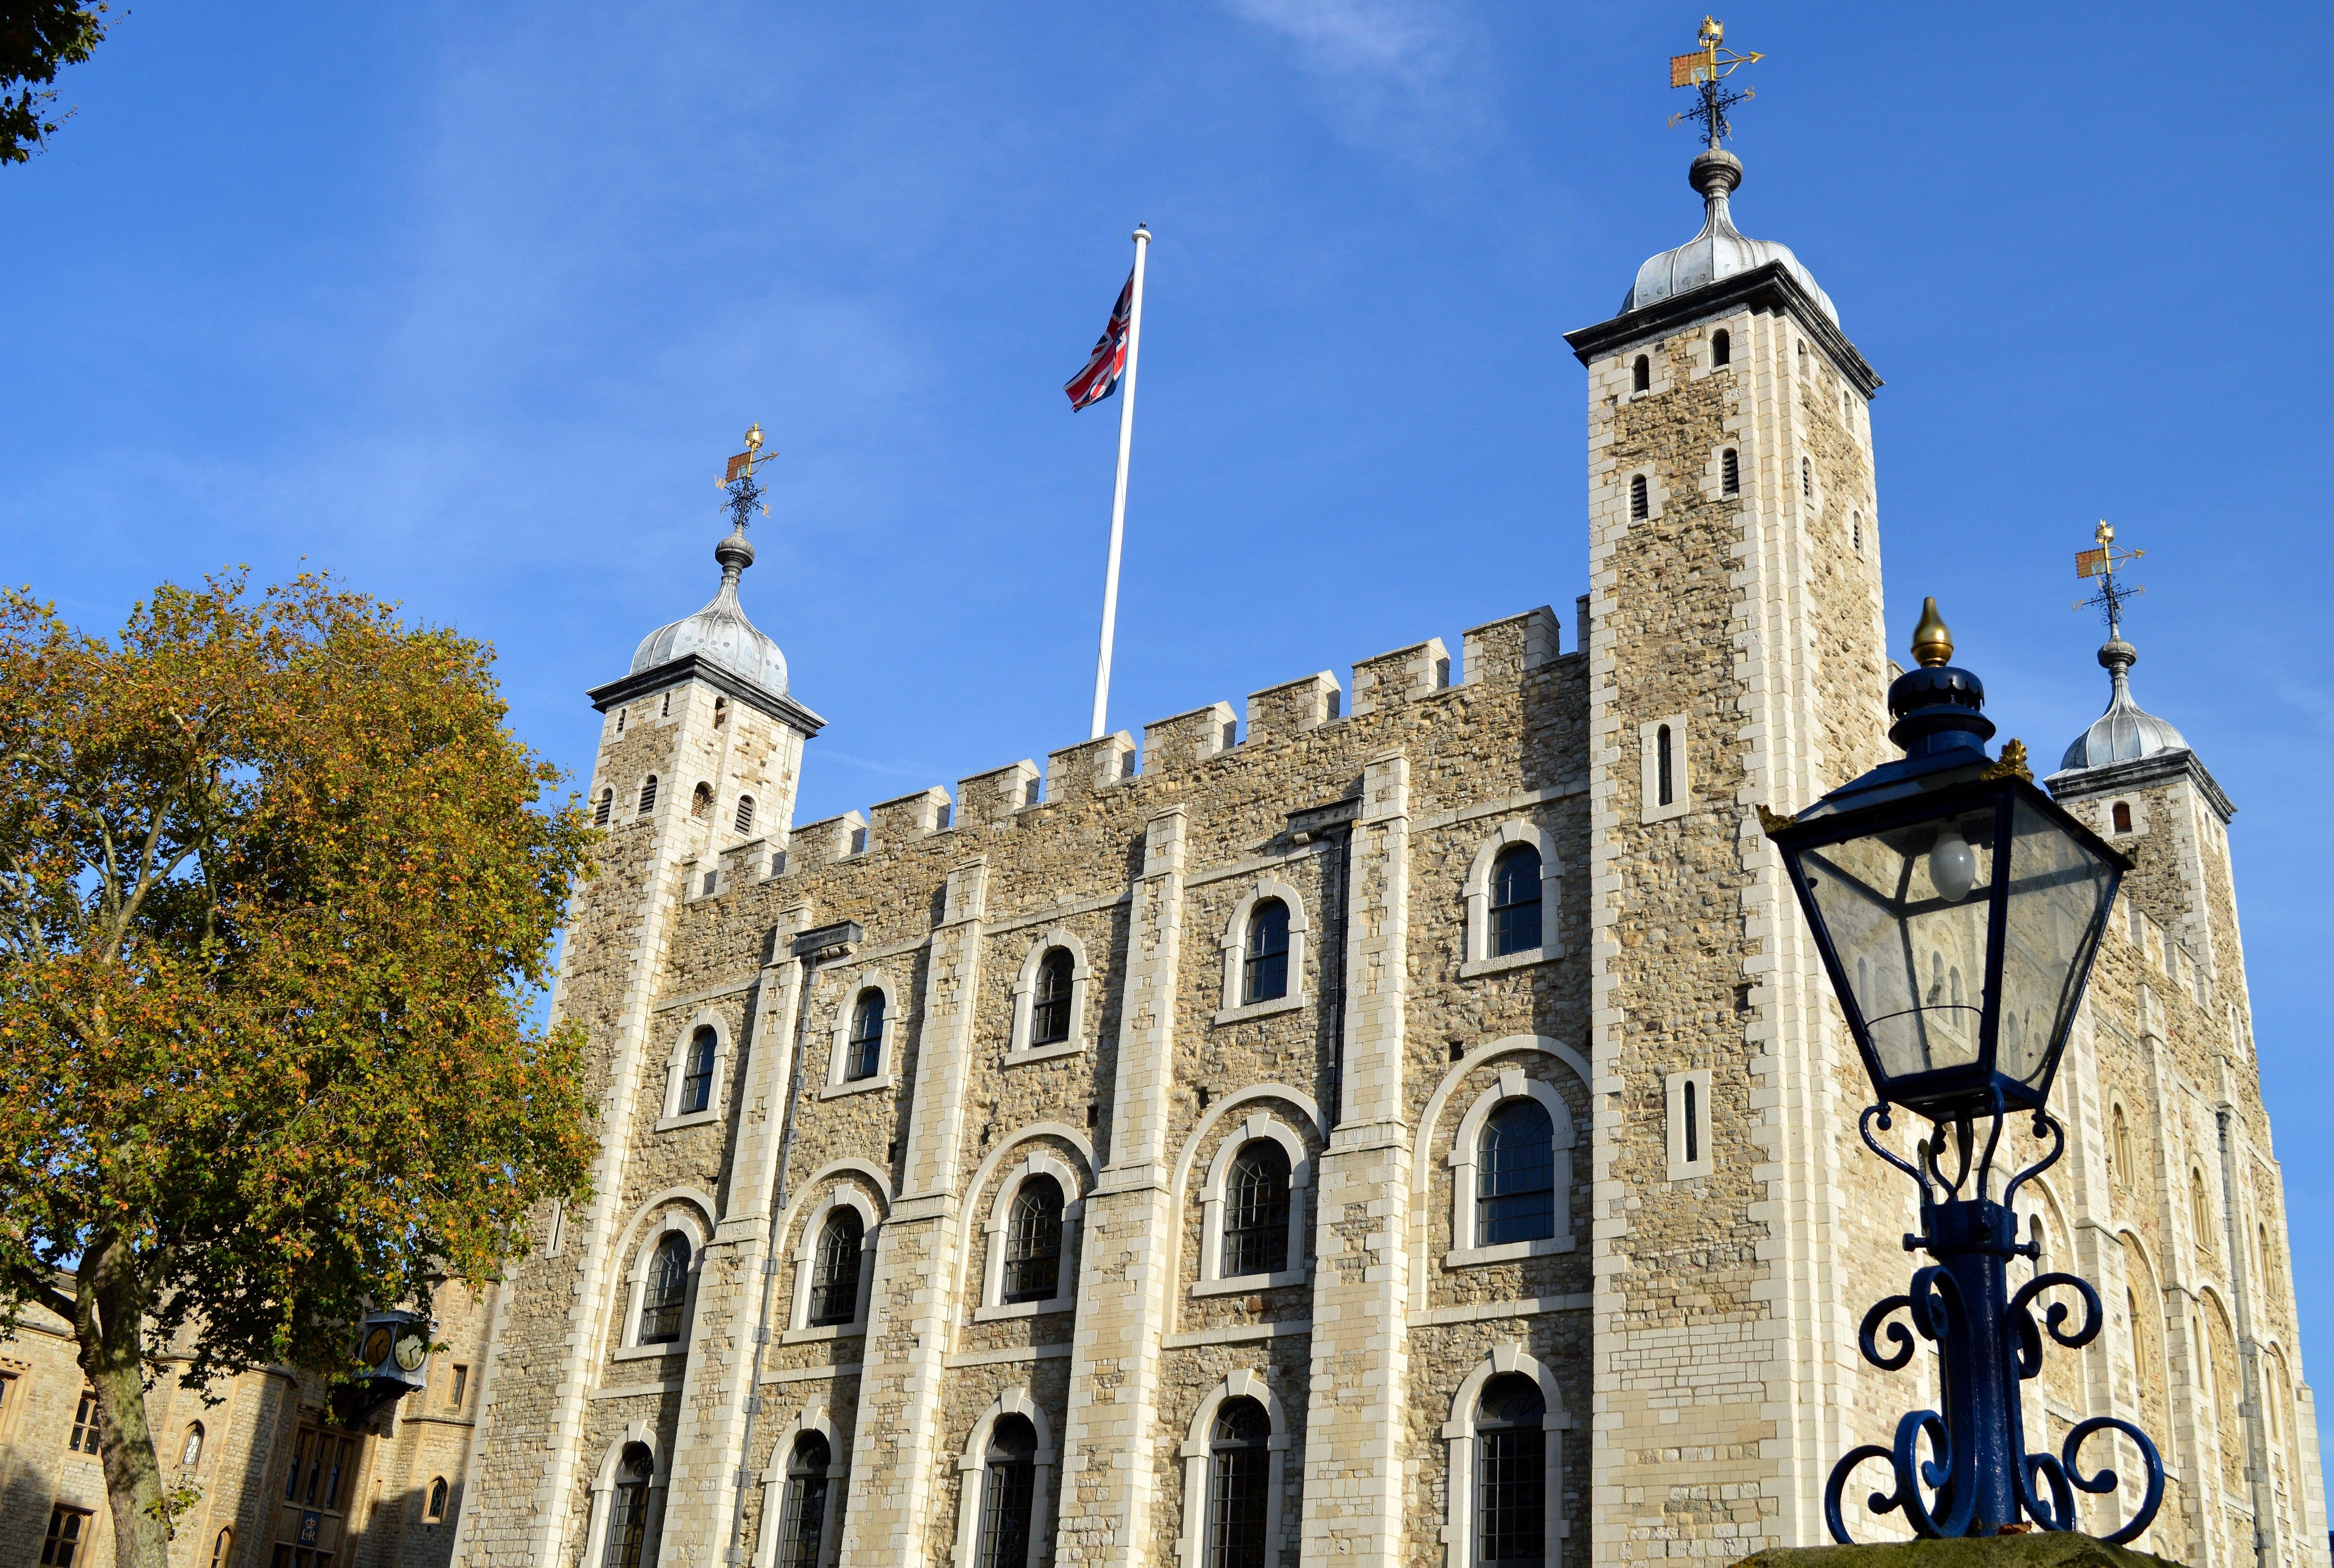 About Tower Of London